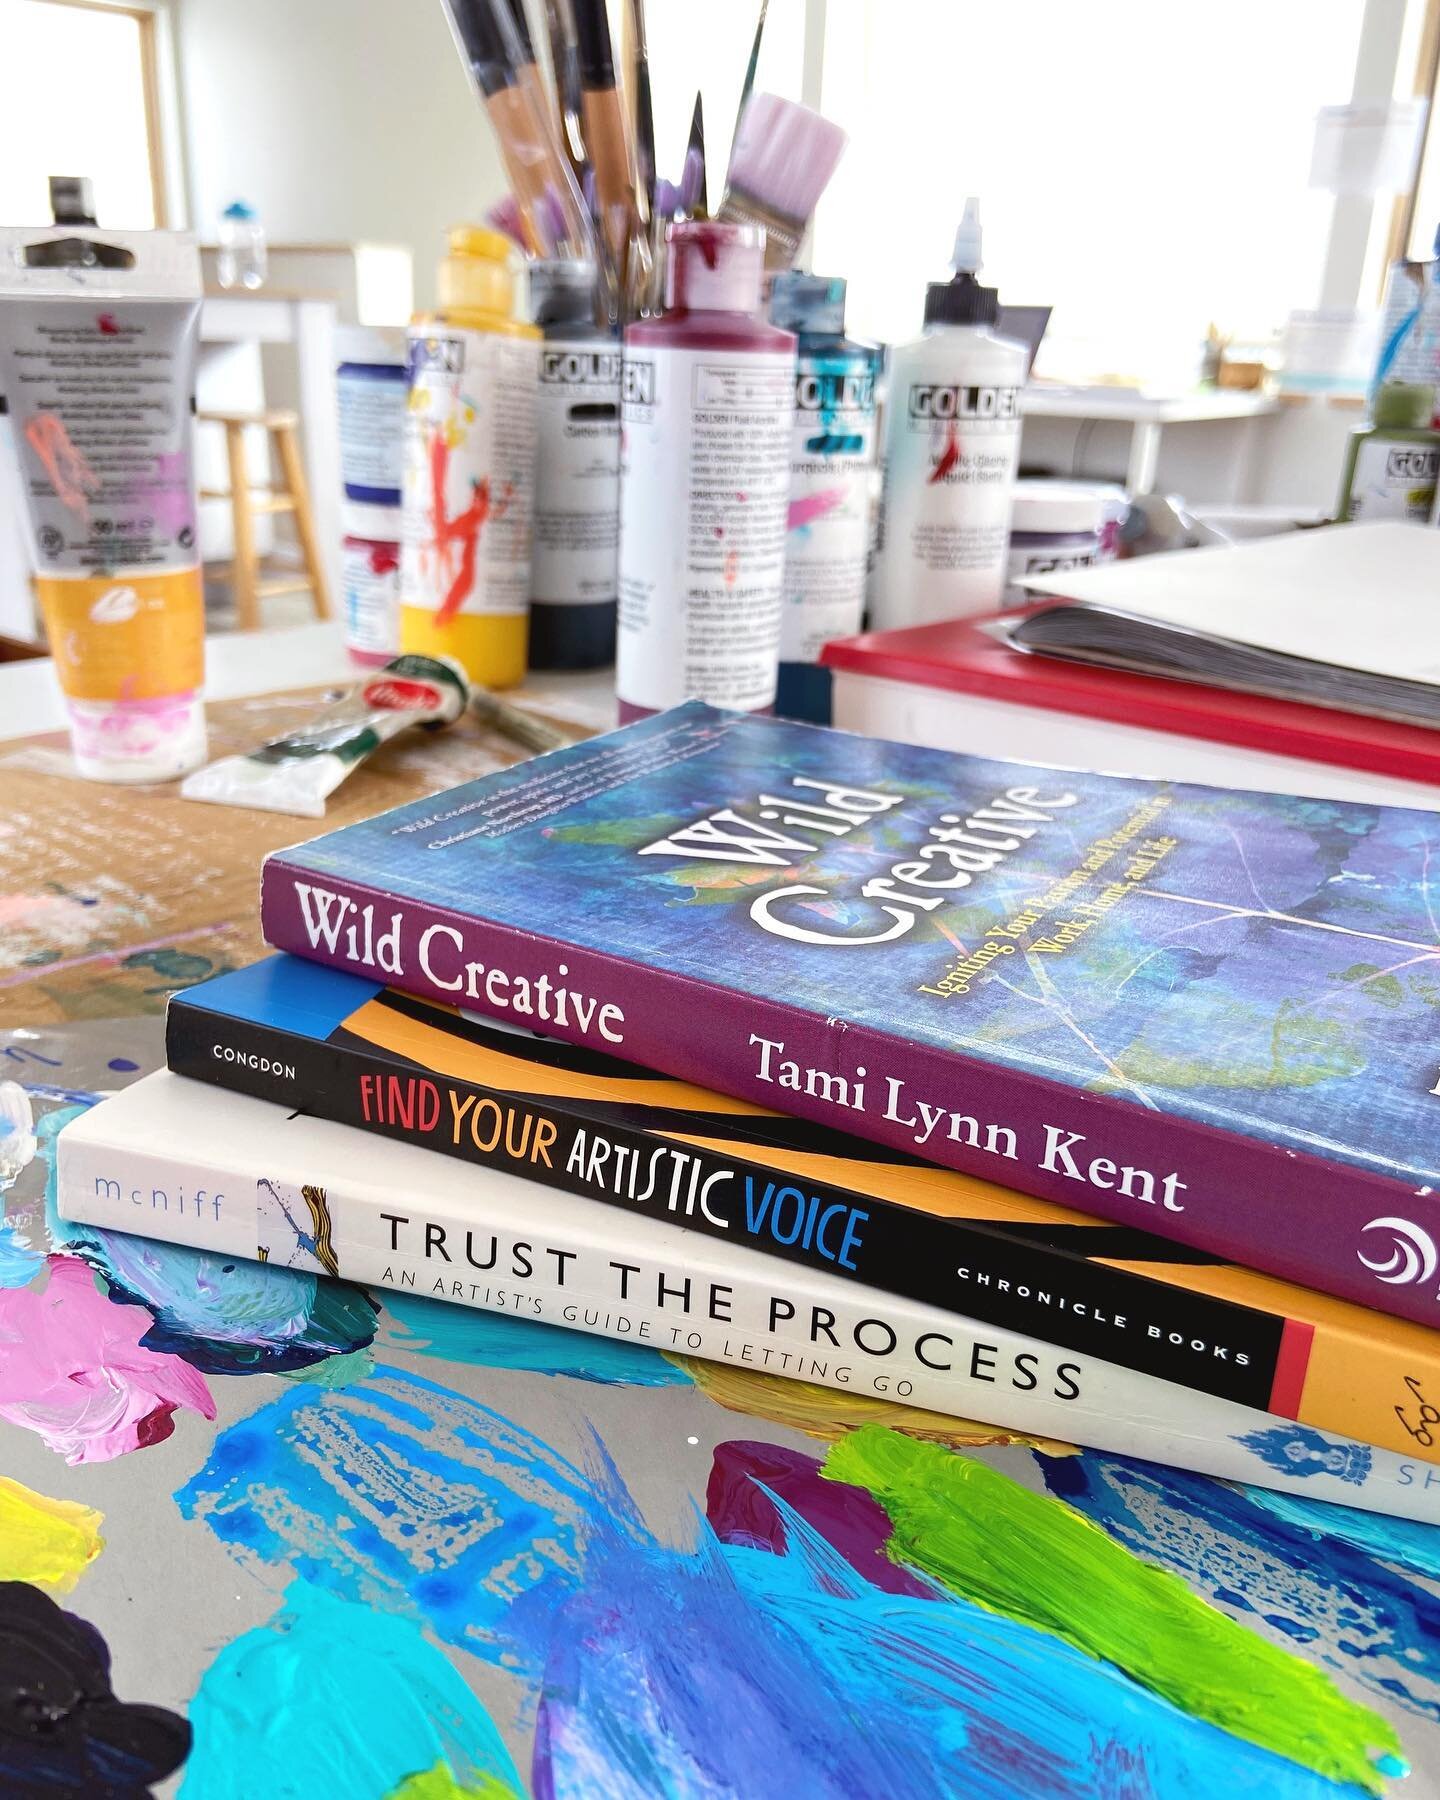 There are so many great books about creativity, the creative process, overcoming creative blocks, and cultivating an artist's mindset!

Currently, I'm reading one called &quot;Kick-Ass Creativity: An Energy Makeover for Artists, Explorers, and Creati